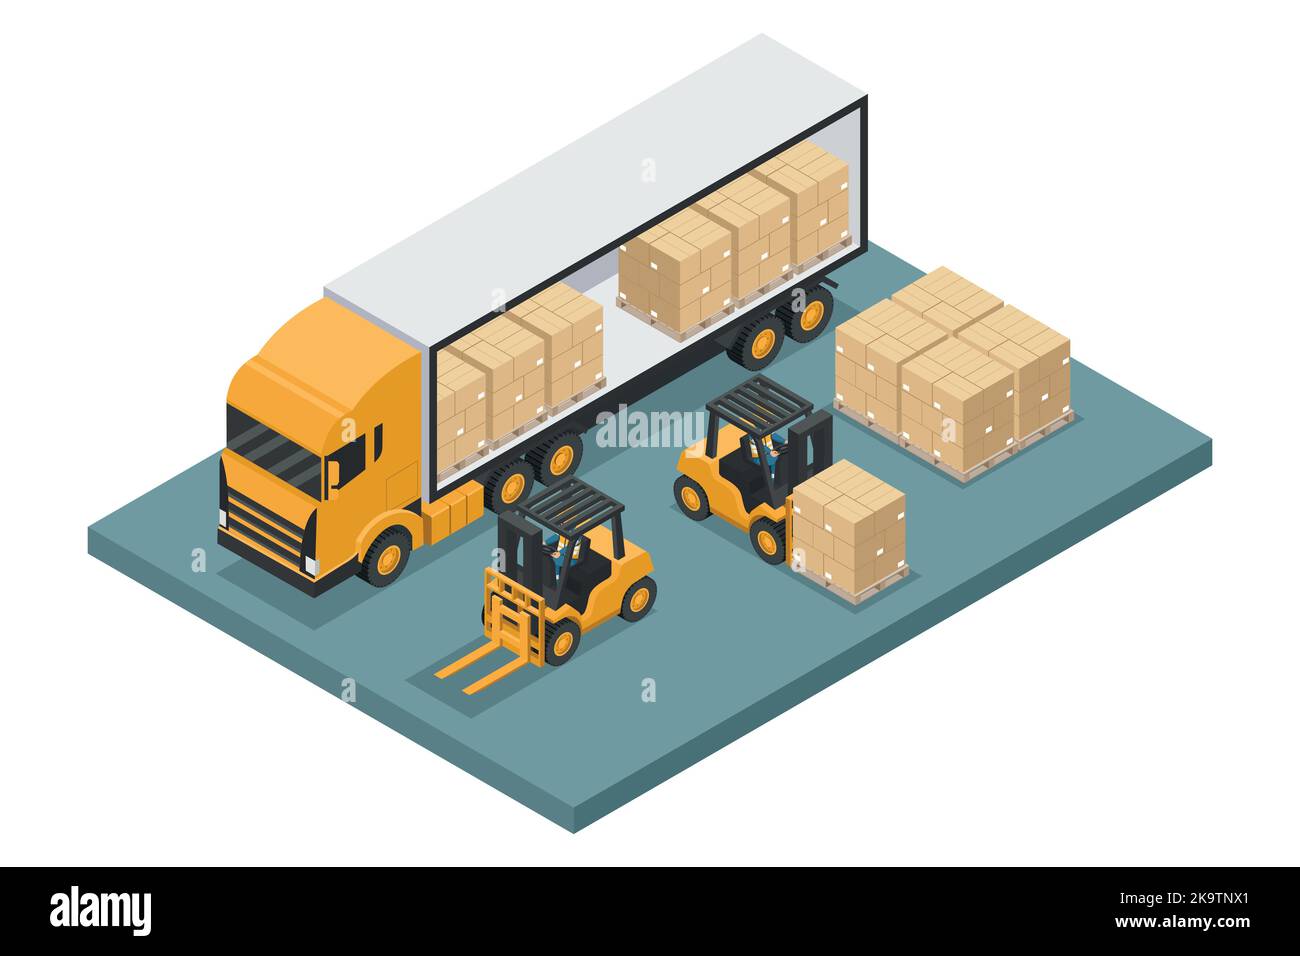 Isometric forklift unloading stacked boxes on pallet from container truck or delivery truck. Safety in handling a fork lift truck. Industrial logistic Stock Vector